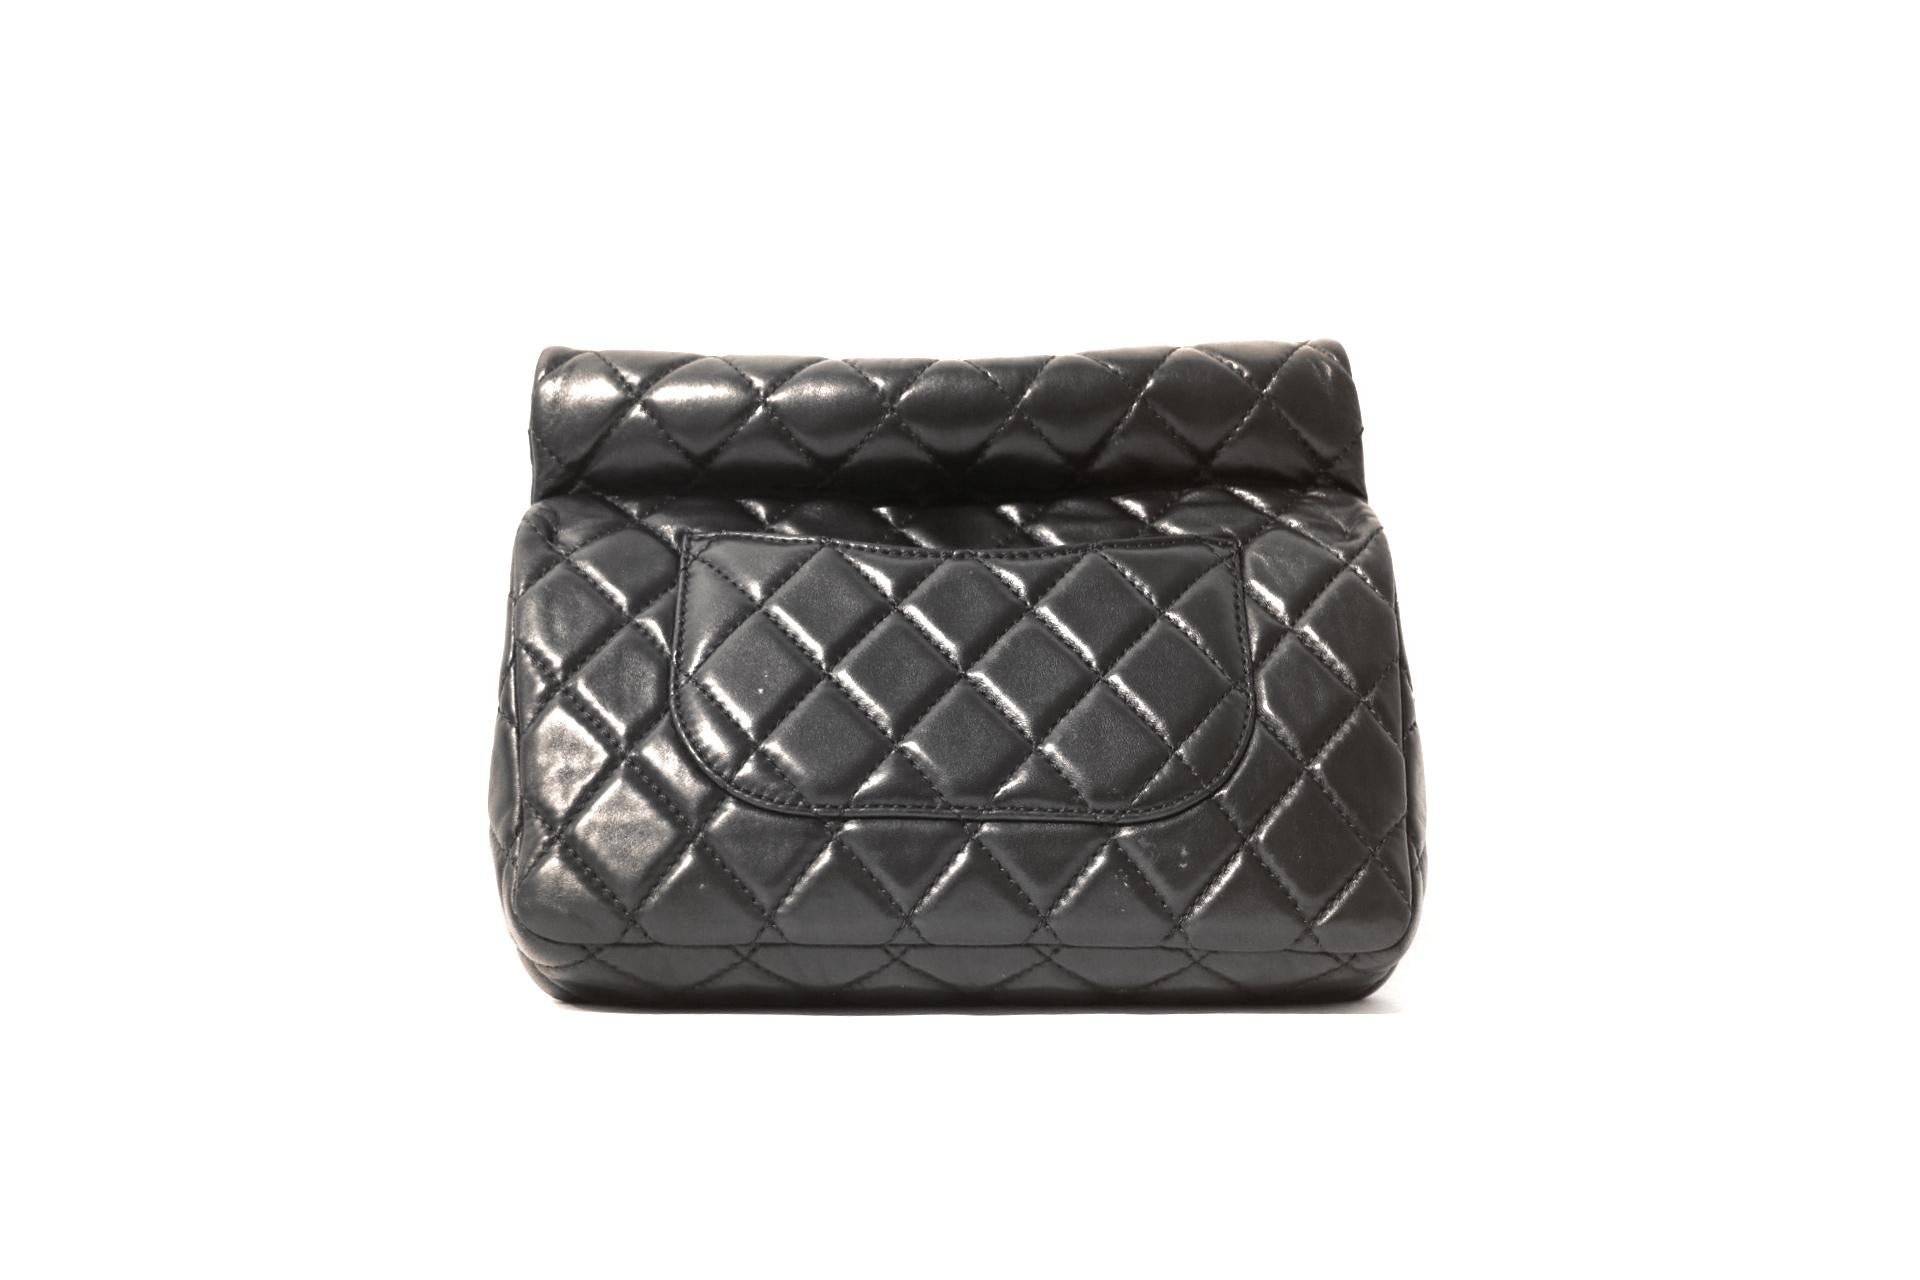 This authentic Chanel Black Leather Rolled Handle Reissue Clutch is in excellent condition.  From the 2012 collection, this unique hand-held style combines the Chanel classic silhouette with an appealing twist.  
Black leather is quilted in